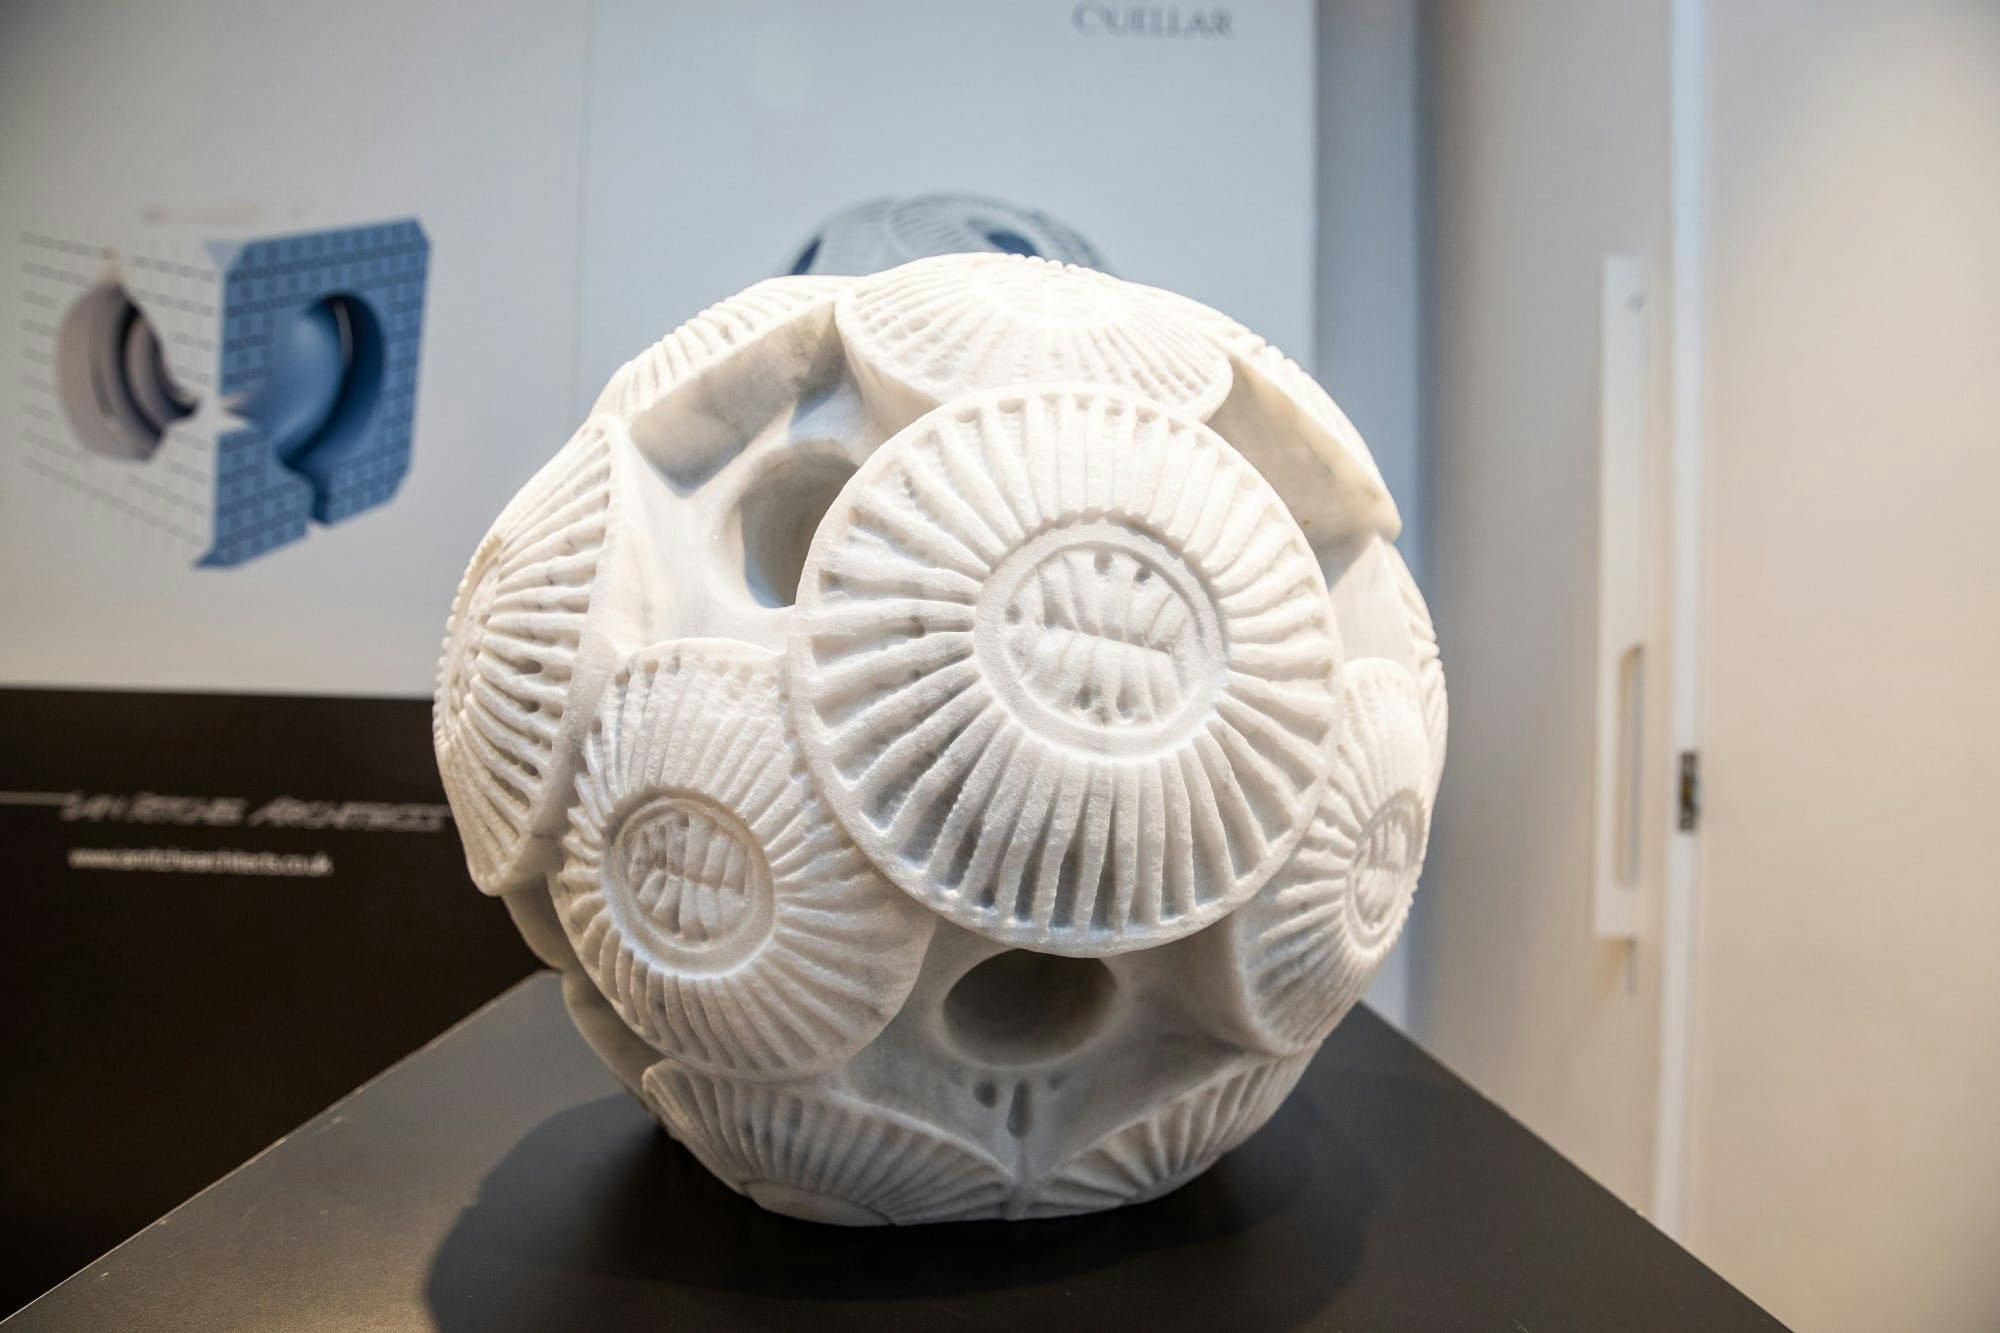 Image 36 of tonkin liu Sculpture 4 in Cosentino Announces the Winners of its Carved in Stone Competition - Cosentino